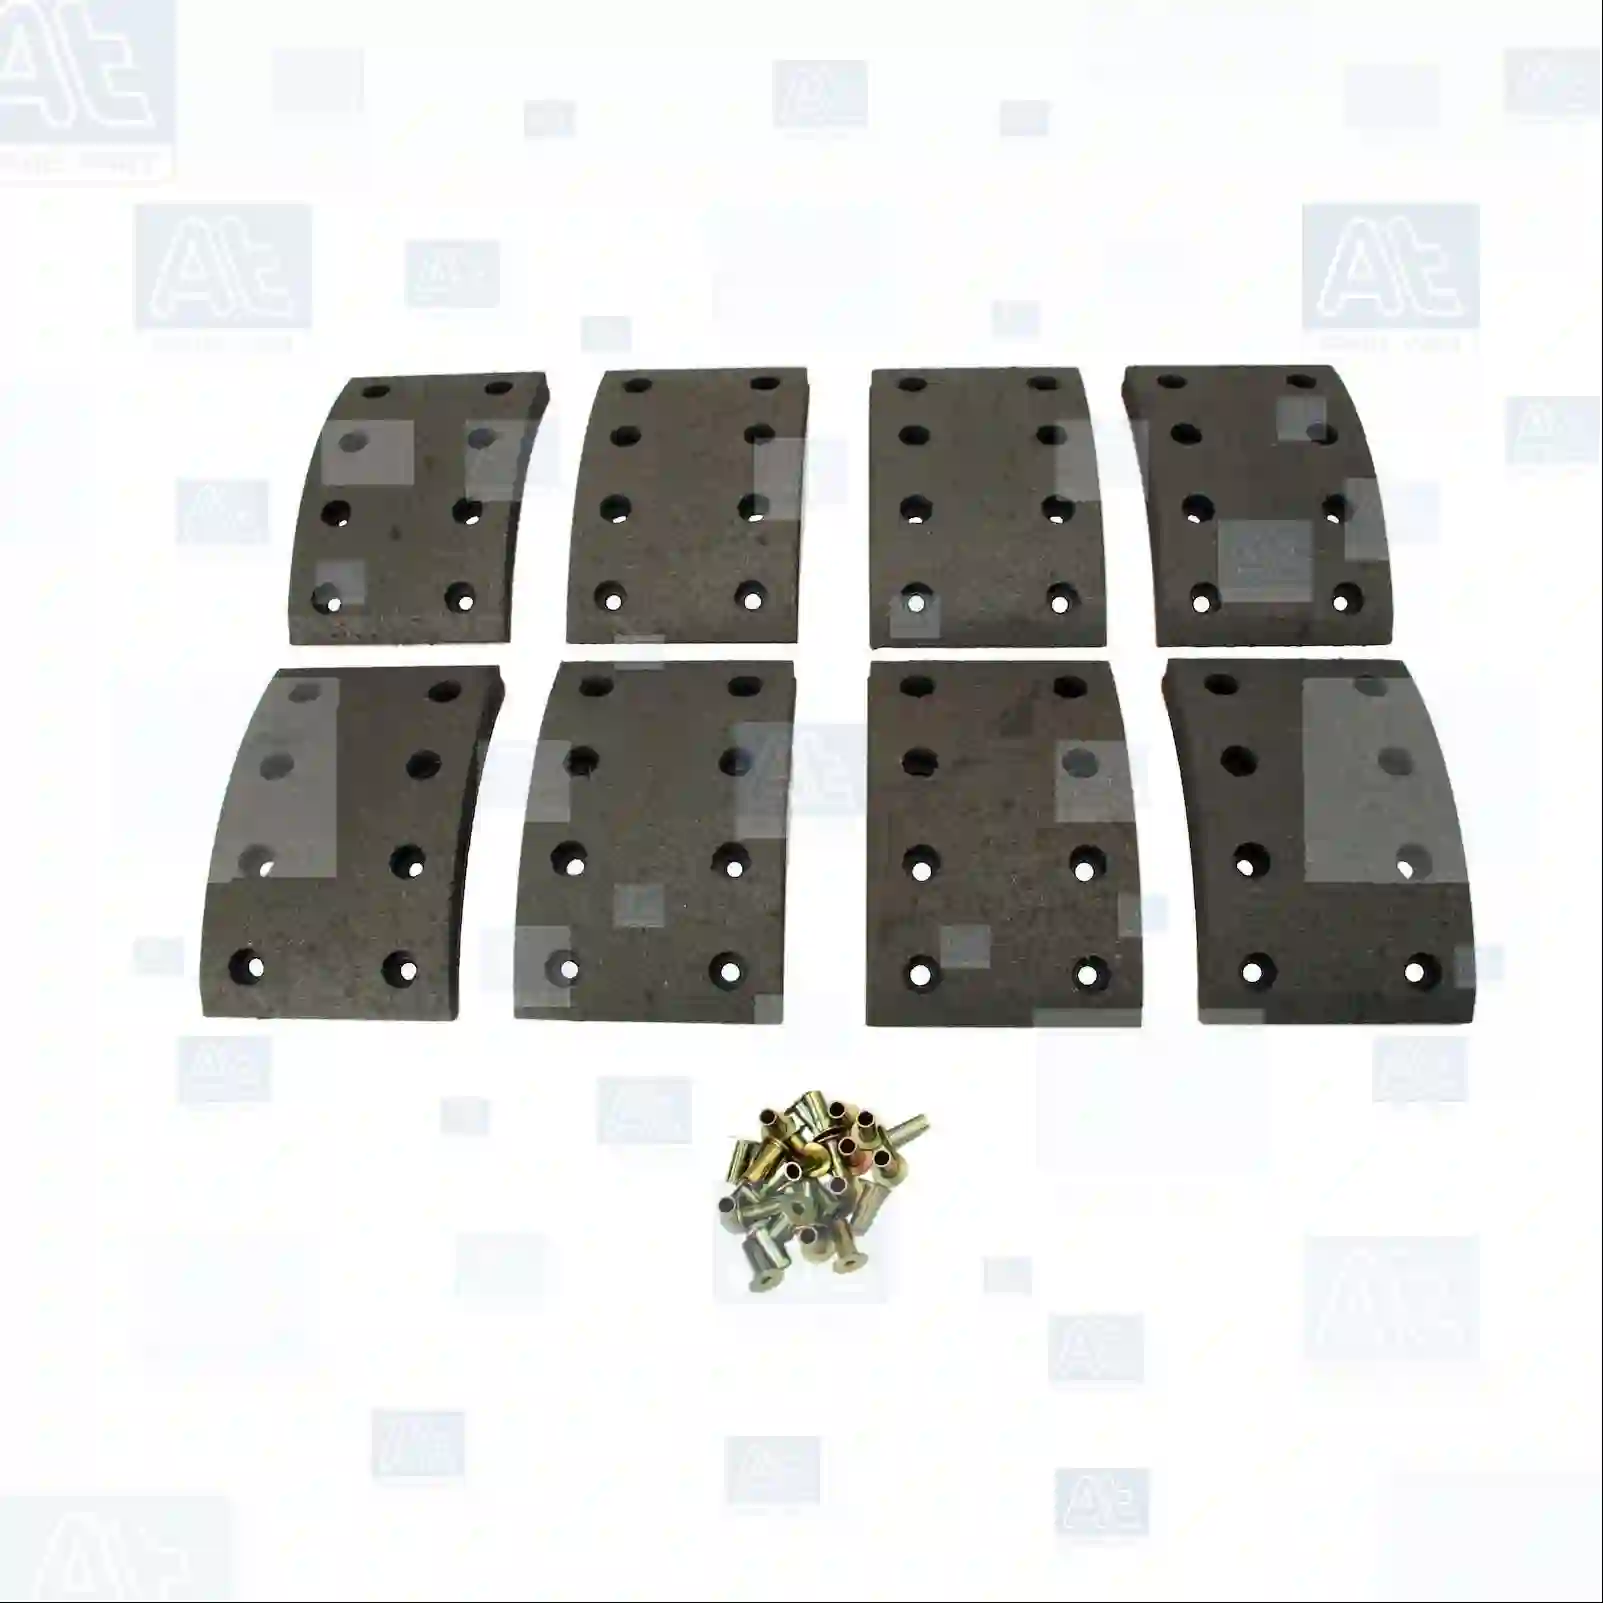 Drum brake lining kit, axle kit - oversize, 77715717, 81502200410, 81502200532, 81502200538, 81502200560, 81502200562, 81502200923, 81502210048, 81502210049, 81502210050, 81502210314, 81502210698, 81502210730, 3524210010, 3524210310, 3524210410, 3524210610, 3524210810, 3534210810, 3534230610, 3534231210, 3534231310, 3604232410, 3814210010, 3814210110, 3814210210, 3814230010, 3814230310, 3814230410, 3814230710, 3834210610, 3834210910, 3834211410, 3834211510, 3834211910, 3834212410, 3834212510, 3834212610, 6174211210, 6174211310, 6174211710, 6174230011, 6174232210, 6174232310, ZG50455-0008 ||  77715717 At Spare Part | Engine, Accelerator Pedal, Camshaft, Connecting Rod, Crankcase, Crankshaft, Cylinder Head, Engine Suspension Mountings, Exhaust Manifold, Exhaust Gas Recirculation, Filter Kits, Flywheel Housing, General Overhaul Kits, Engine, Intake Manifold, Oil Cleaner, Oil Cooler, Oil Filter, Oil Pump, Oil Sump, Piston & Liner, Sensor & Switch, Timing Case, Turbocharger, Cooling System, Belt Tensioner, Coolant Filter, Coolant Pipe, Corrosion Prevention Agent, Drive, Expansion Tank, Fan, Intercooler, Monitors & Gauges, Radiator, Thermostat, V-Belt / Timing belt, Water Pump, Fuel System, Electronical Injector Unit, Feed Pump, Fuel Filter, cpl., Fuel Gauge Sender,  Fuel Line, Fuel Pump, Fuel Tank, Injection Line Kit, Injection Pump, Exhaust System, Clutch & Pedal, Gearbox, Propeller Shaft, Axles, Brake System, Hubs & Wheels, Suspension, Leaf Spring, Universal Parts / Accessories, Steering, Electrical System, Cabin Drum brake lining kit, axle kit - oversize, 77715717, 81502200410, 81502200532, 81502200538, 81502200560, 81502200562, 81502200923, 81502210048, 81502210049, 81502210050, 81502210314, 81502210698, 81502210730, 3524210010, 3524210310, 3524210410, 3524210610, 3524210810, 3534210810, 3534230610, 3534231210, 3534231310, 3604232410, 3814210010, 3814210110, 3814210210, 3814230010, 3814230310, 3814230410, 3814230710, 3834210610, 3834210910, 3834211410, 3834211510, 3834211910, 3834212410, 3834212510, 3834212610, 6174211210, 6174211310, 6174211710, 6174230011, 6174232210, 6174232310, ZG50455-0008 ||  77715717 At Spare Part | Engine, Accelerator Pedal, Camshaft, Connecting Rod, Crankcase, Crankshaft, Cylinder Head, Engine Suspension Mountings, Exhaust Manifold, Exhaust Gas Recirculation, Filter Kits, Flywheel Housing, General Overhaul Kits, Engine, Intake Manifold, Oil Cleaner, Oil Cooler, Oil Filter, Oil Pump, Oil Sump, Piston & Liner, Sensor & Switch, Timing Case, Turbocharger, Cooling System, Belt Tensioner, Coolant Filter, Coolant Pipe, Corrosion Prevention Agent, Drive, Expansion Tank, Fan, Intercooler, Monitors & Gauges, Radiator, Thermostat, V-Belt / Timing belt, Water Pump, Fuel System, Electronical Injector Unit, Feed Pump, Fuel Filter, cpl., Fuel Gauge Sender,  Fuel Line, Fuel Pump, Fuel Tank, Injection Line Kit, Injection Pump, Exhaust System, Clutch & Pedal, Gearbox, Propeller Shaft, Axles, Brake System, Hubs & Wheels, Suspension, Leaf Spring, Universal Parts / Accessories, Steering, Electrical System, Cabin